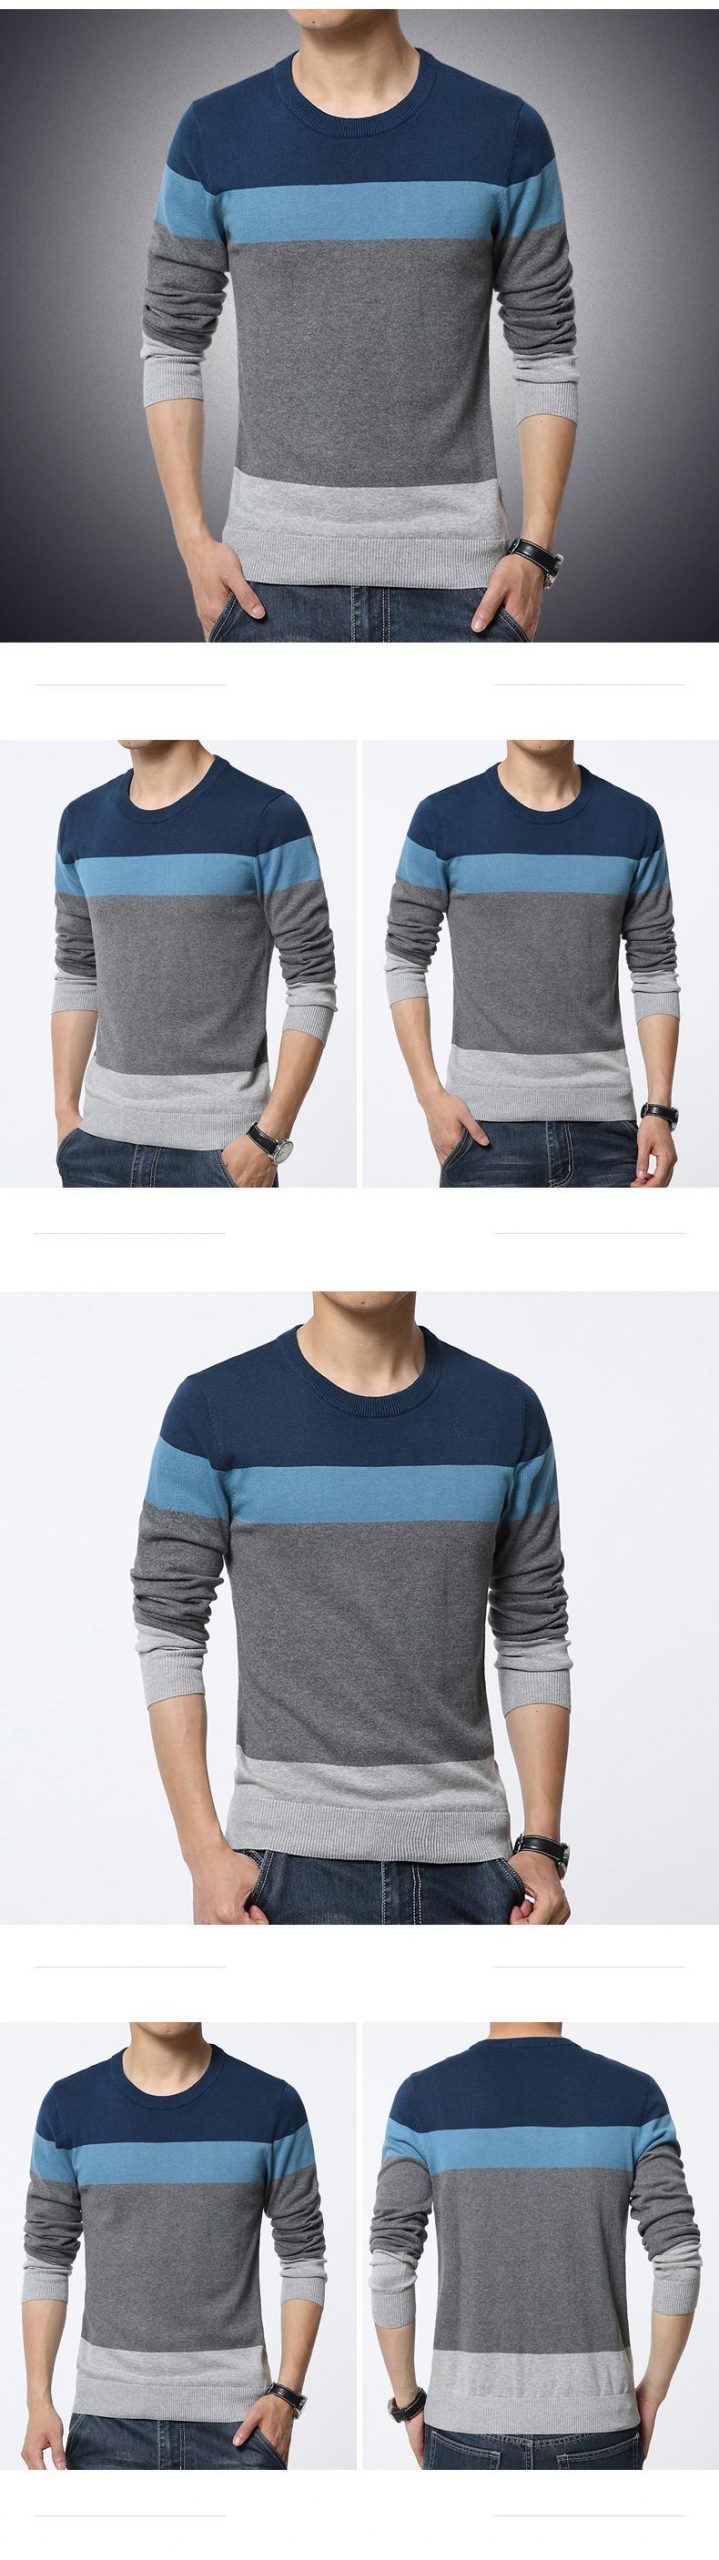 Men’s Casual Style Striped Sweater